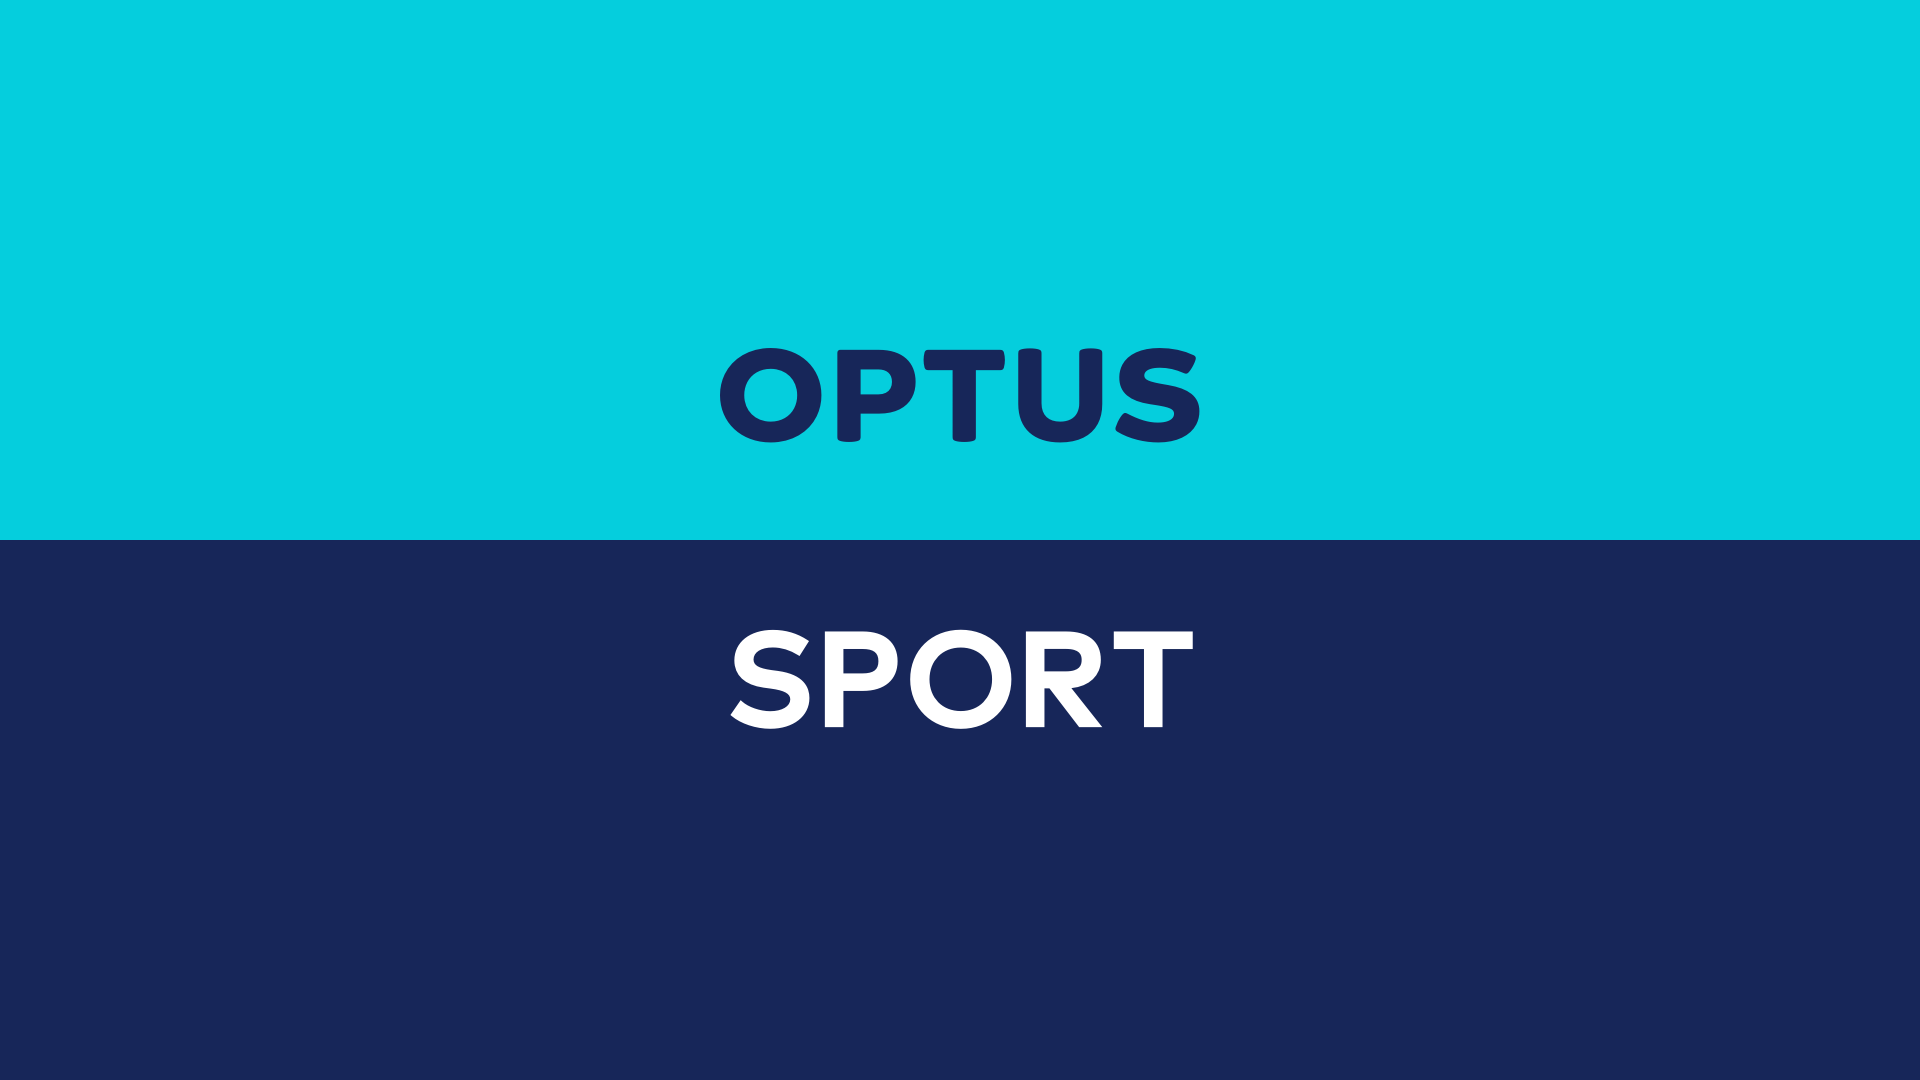 Optus reveals live European soccer streaming on YouTube and Twitter1920 x 1080